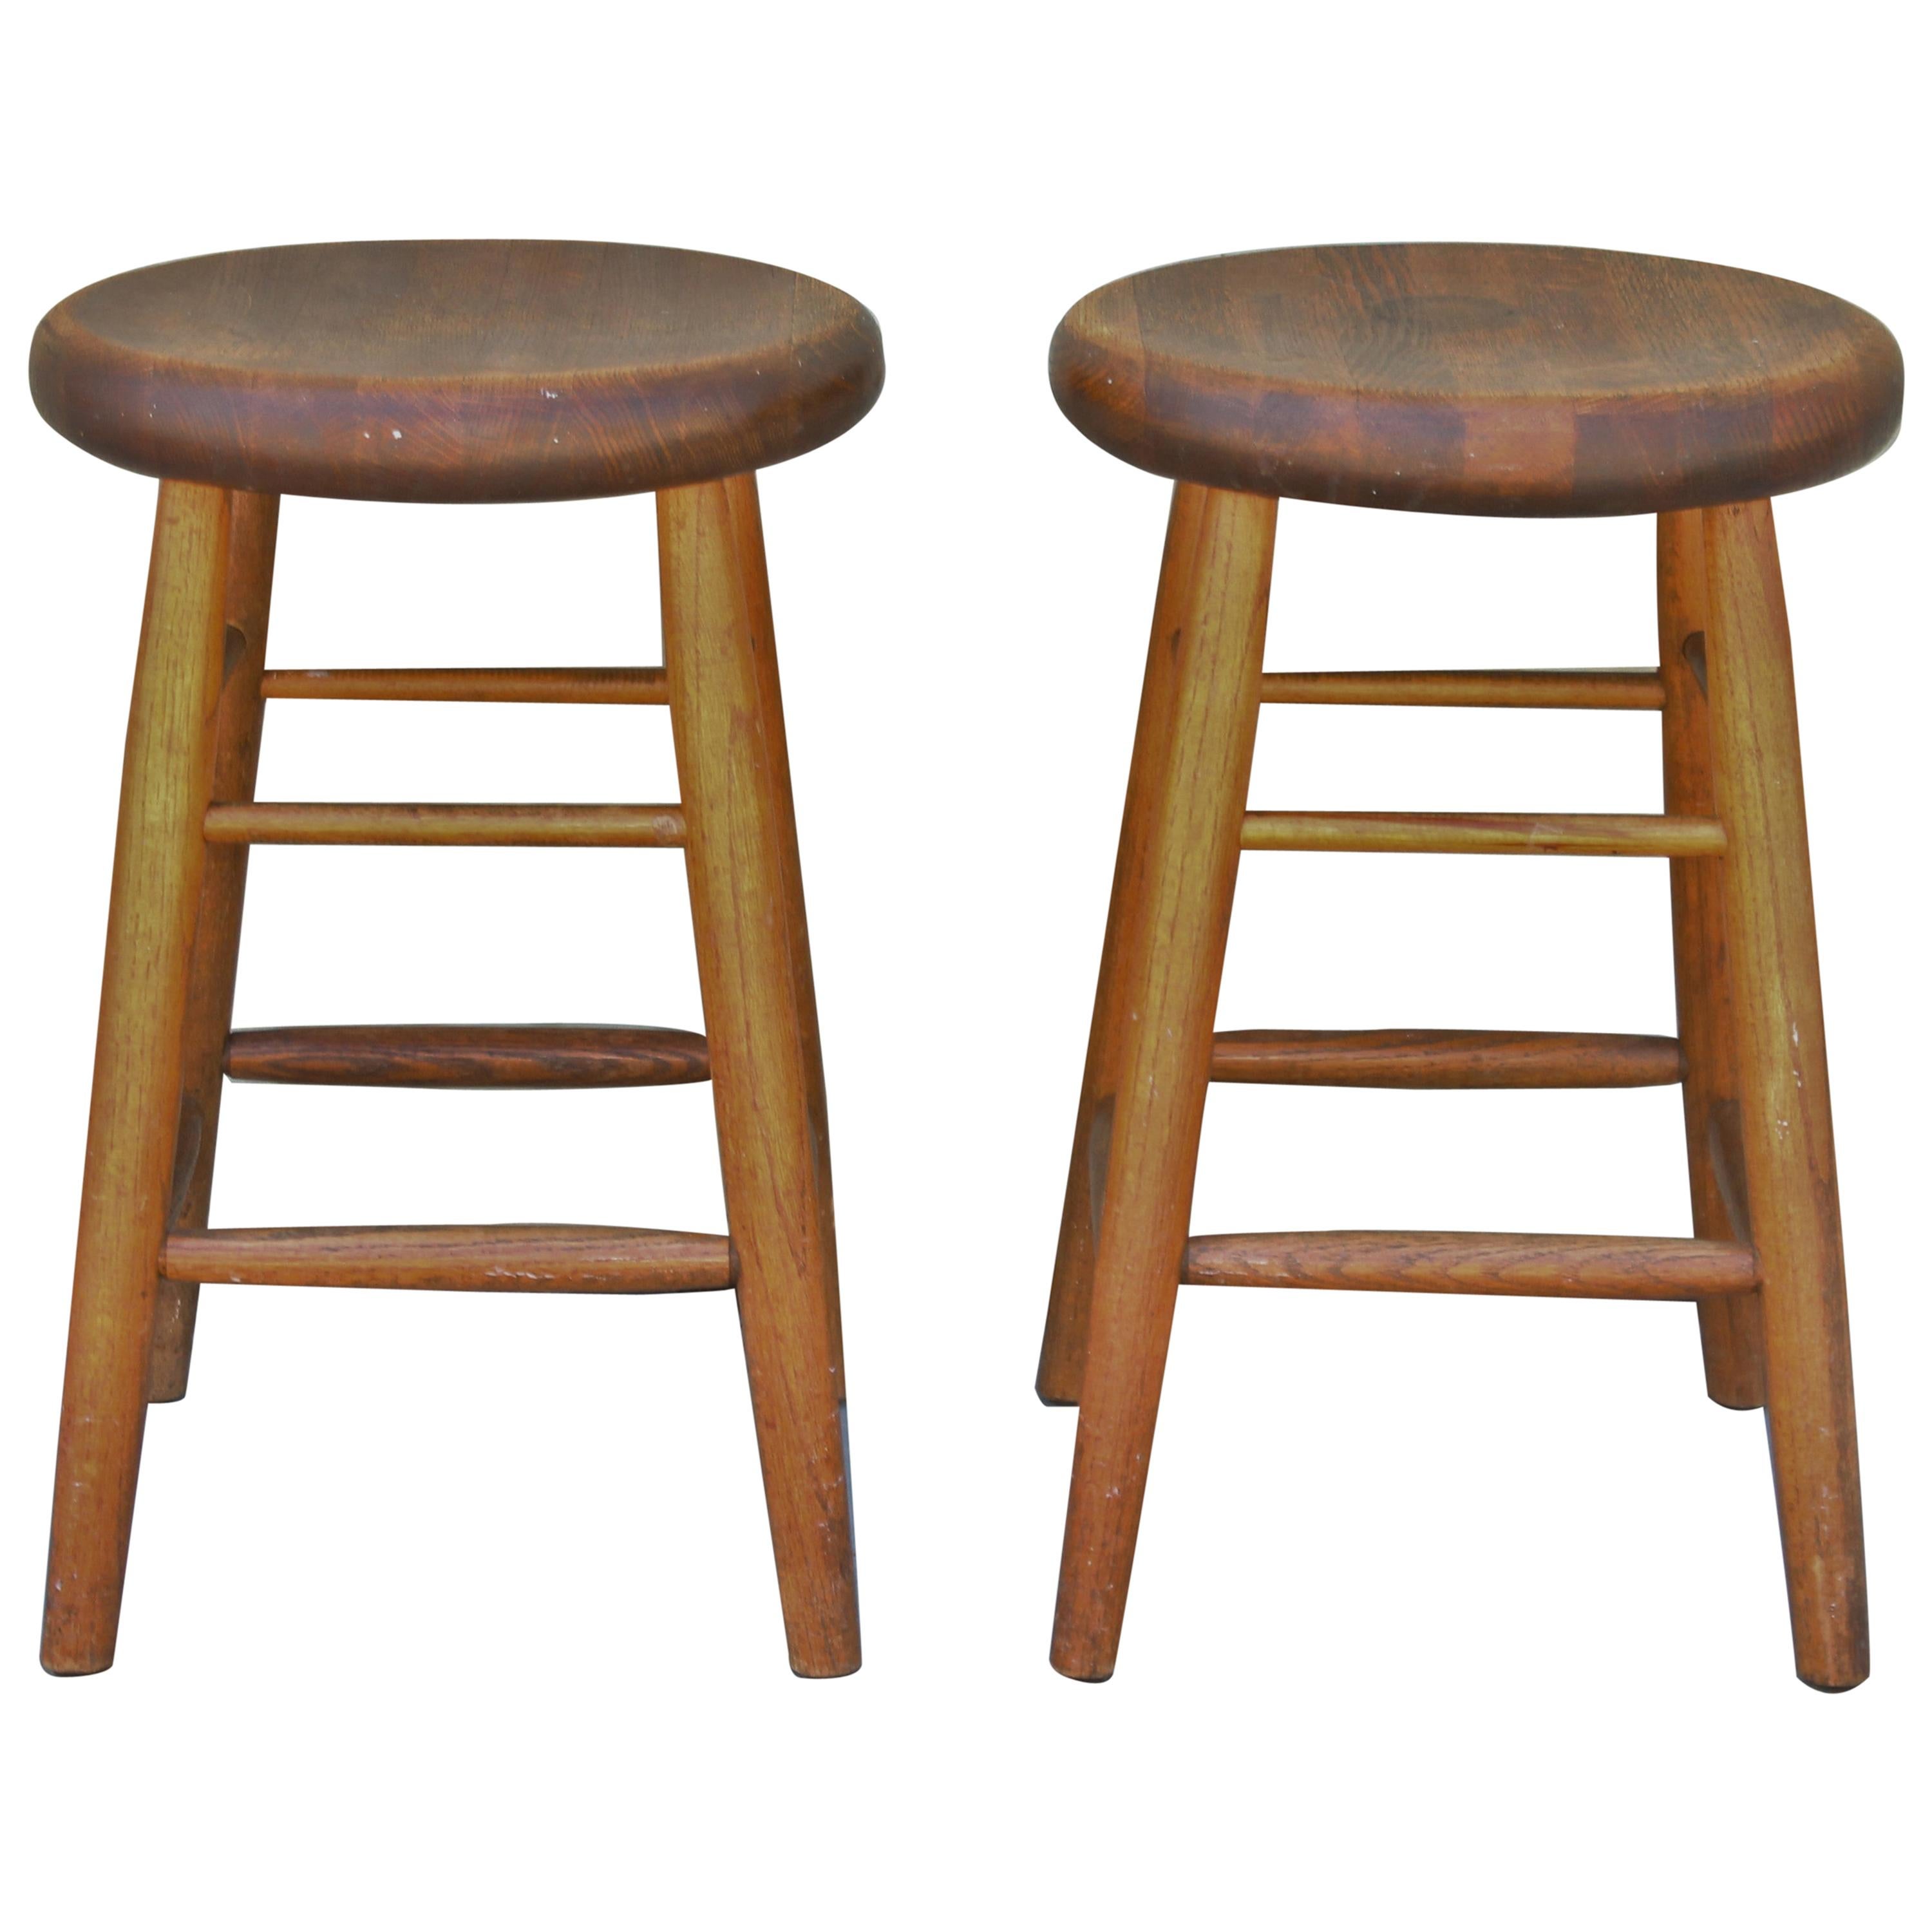 Pair of Early 20th Century Plank Seat Bar Stools